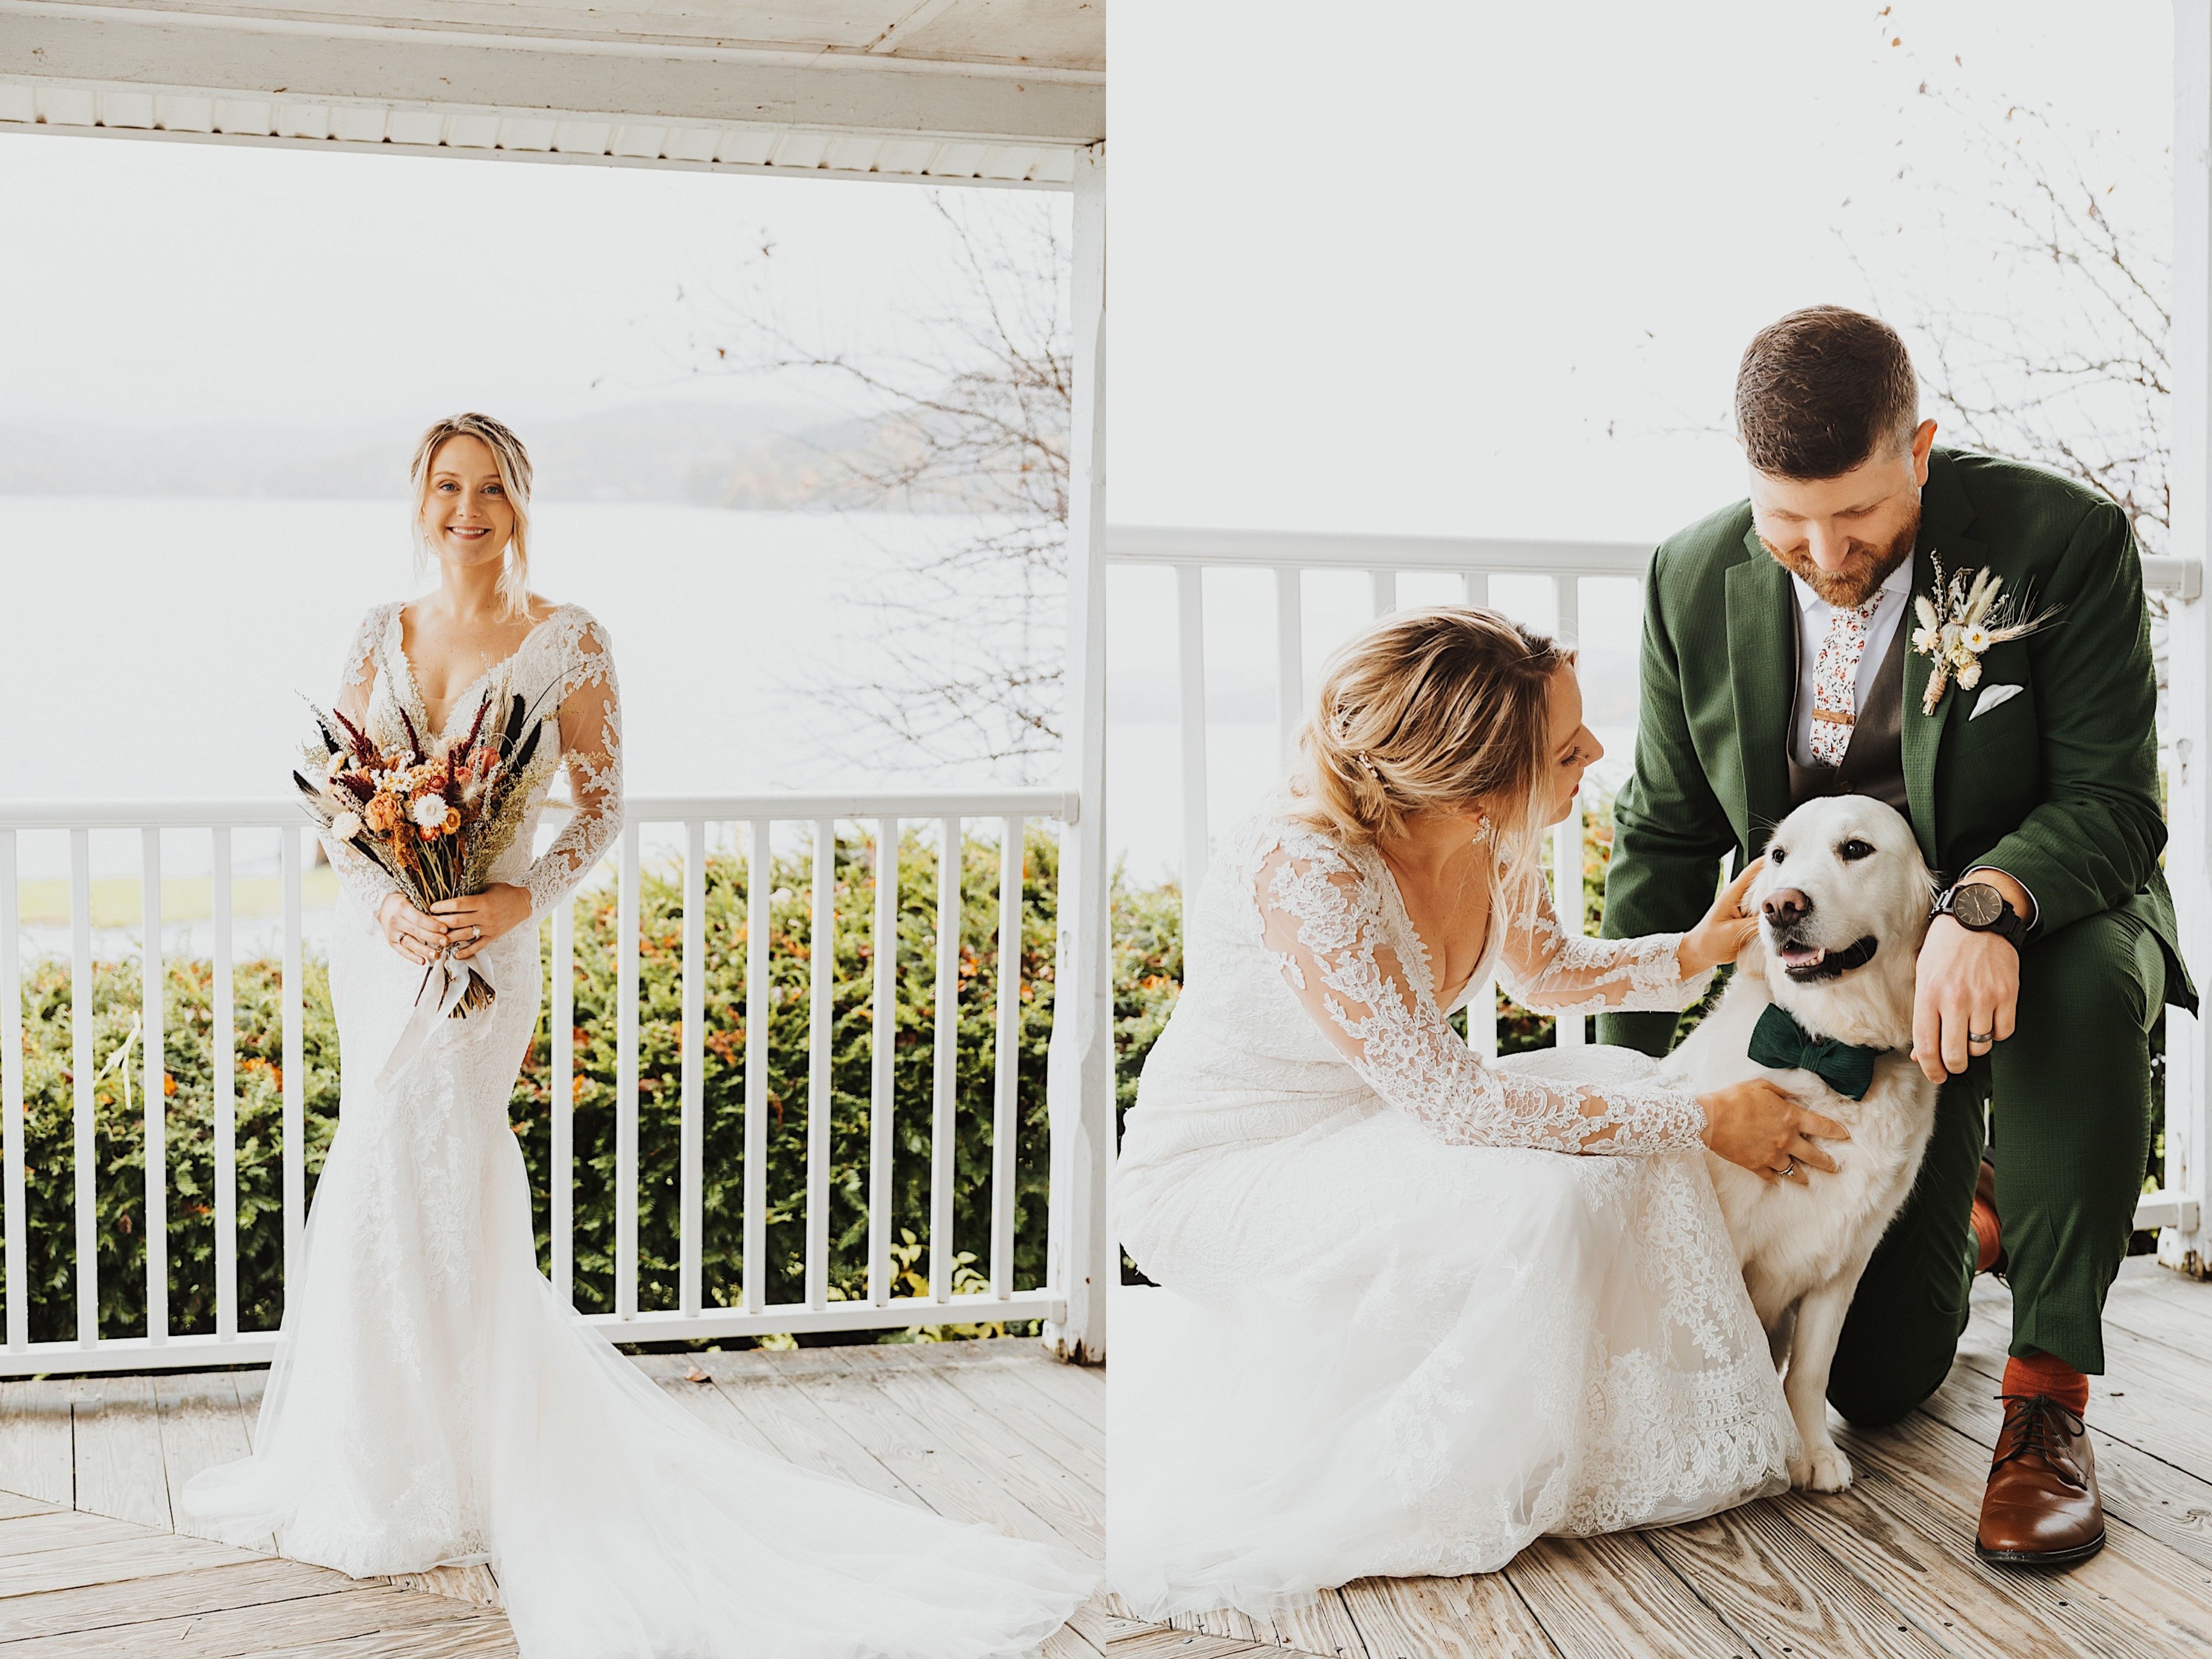 2 photos side by side, the left is a portrait photo of the bride smiling at the camera while on the front porch of a home, the right is of the bride with the groom crouching down as they pet their dog together